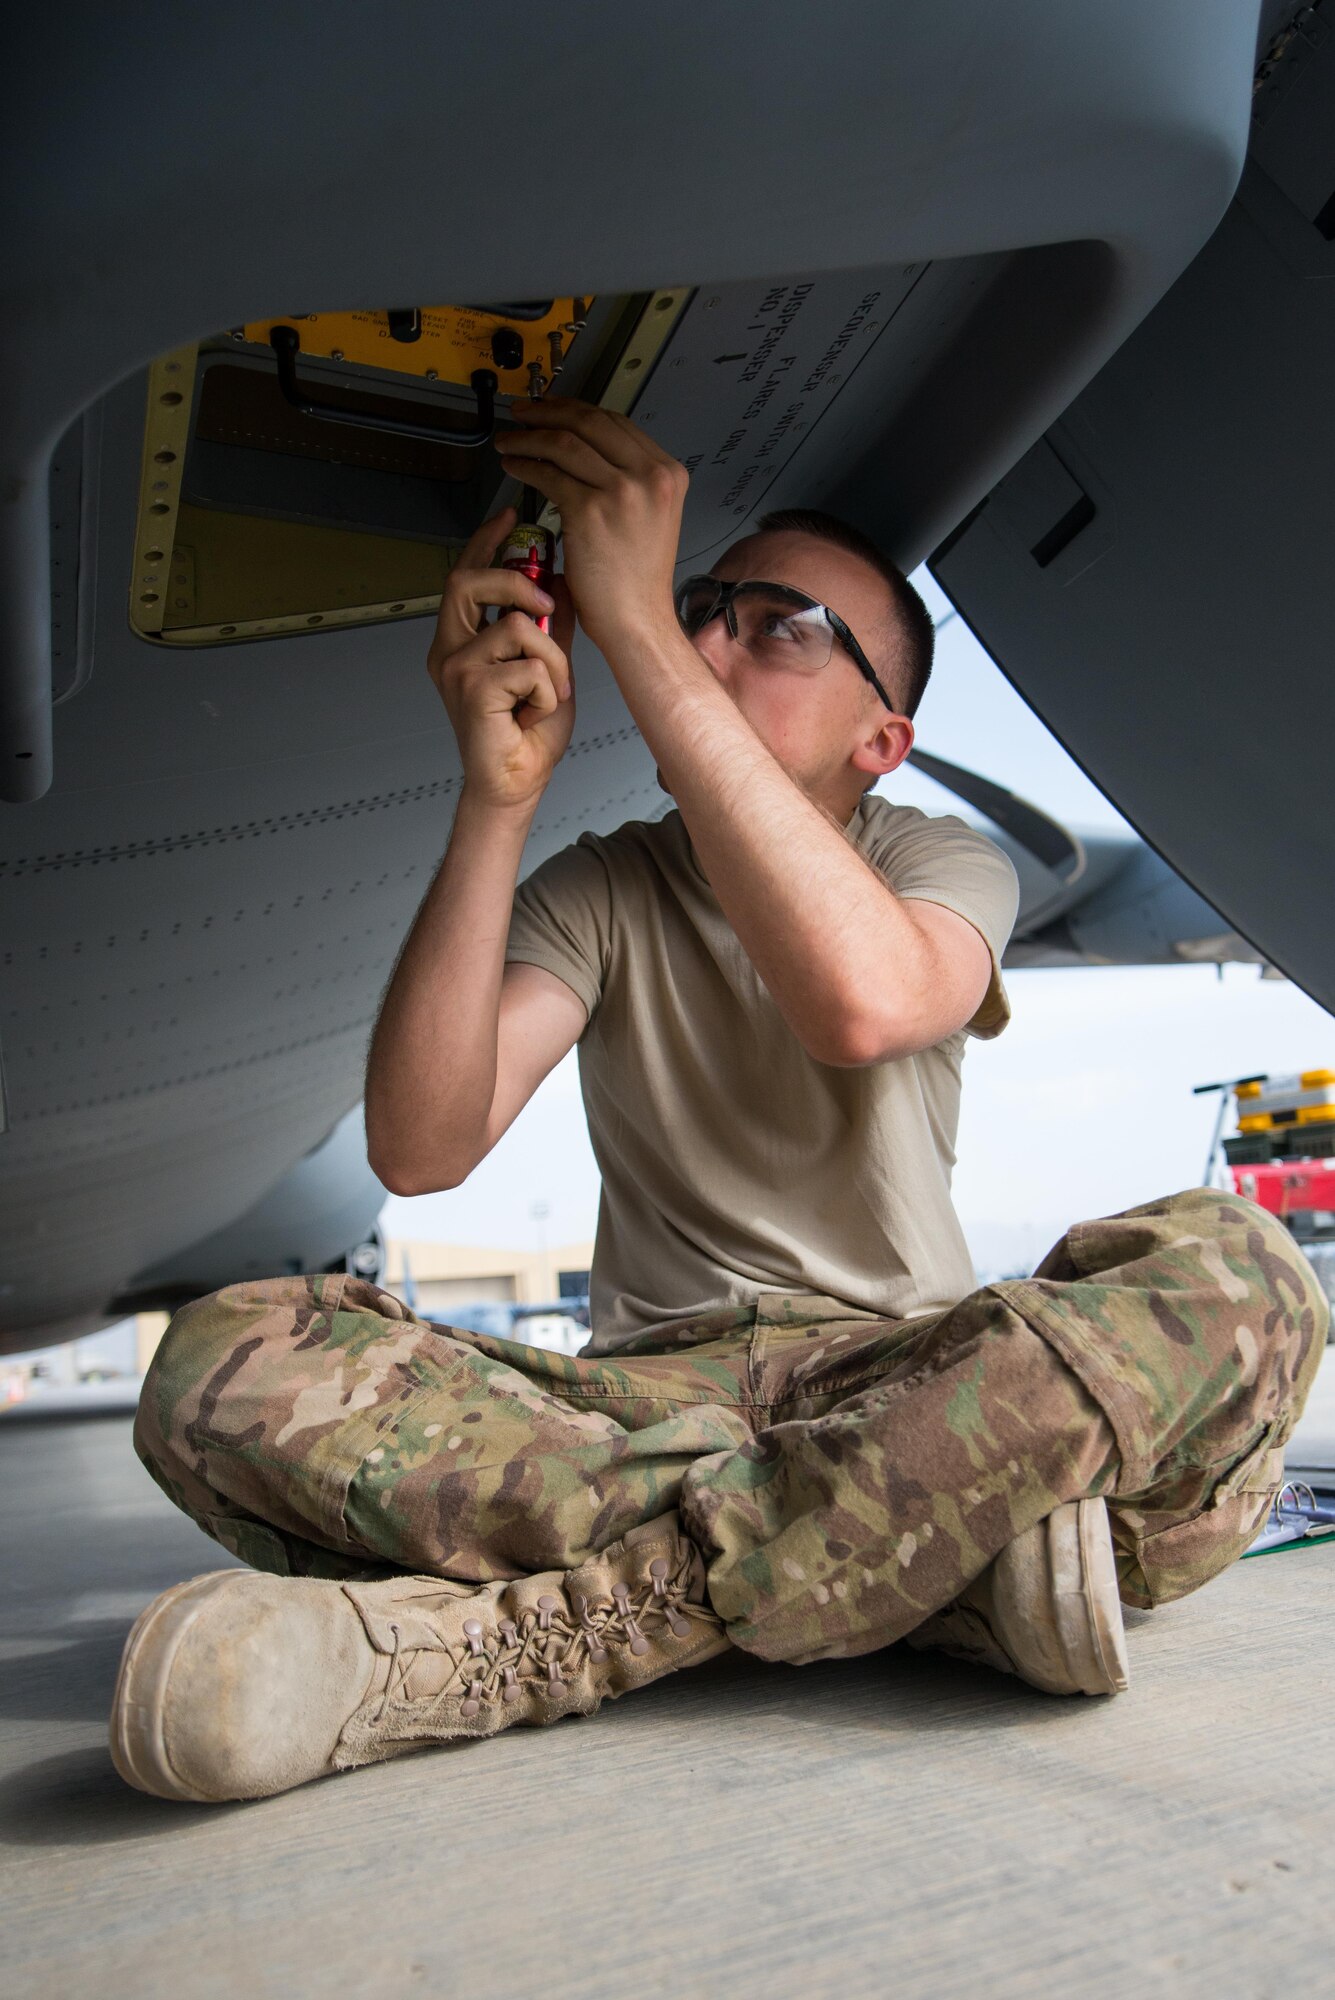 U.S. Air Force Airman Christopher Koepnick, assigned to the 455th Expeditionary Aircraft Maintenance Squadron, installs a countermeasure set for testing on a C-130J Super Hercules aircraft on the flight line at Bagram Airfield, Afghanistan, May 5, 2015.  The 455th EAMXS ensure Super Hercules on Bagram are prepared for flight and return them to a mission-ready state once they land. (U.S. Air Force photo by Tech. Sgt. Joseph Swafford/Released)